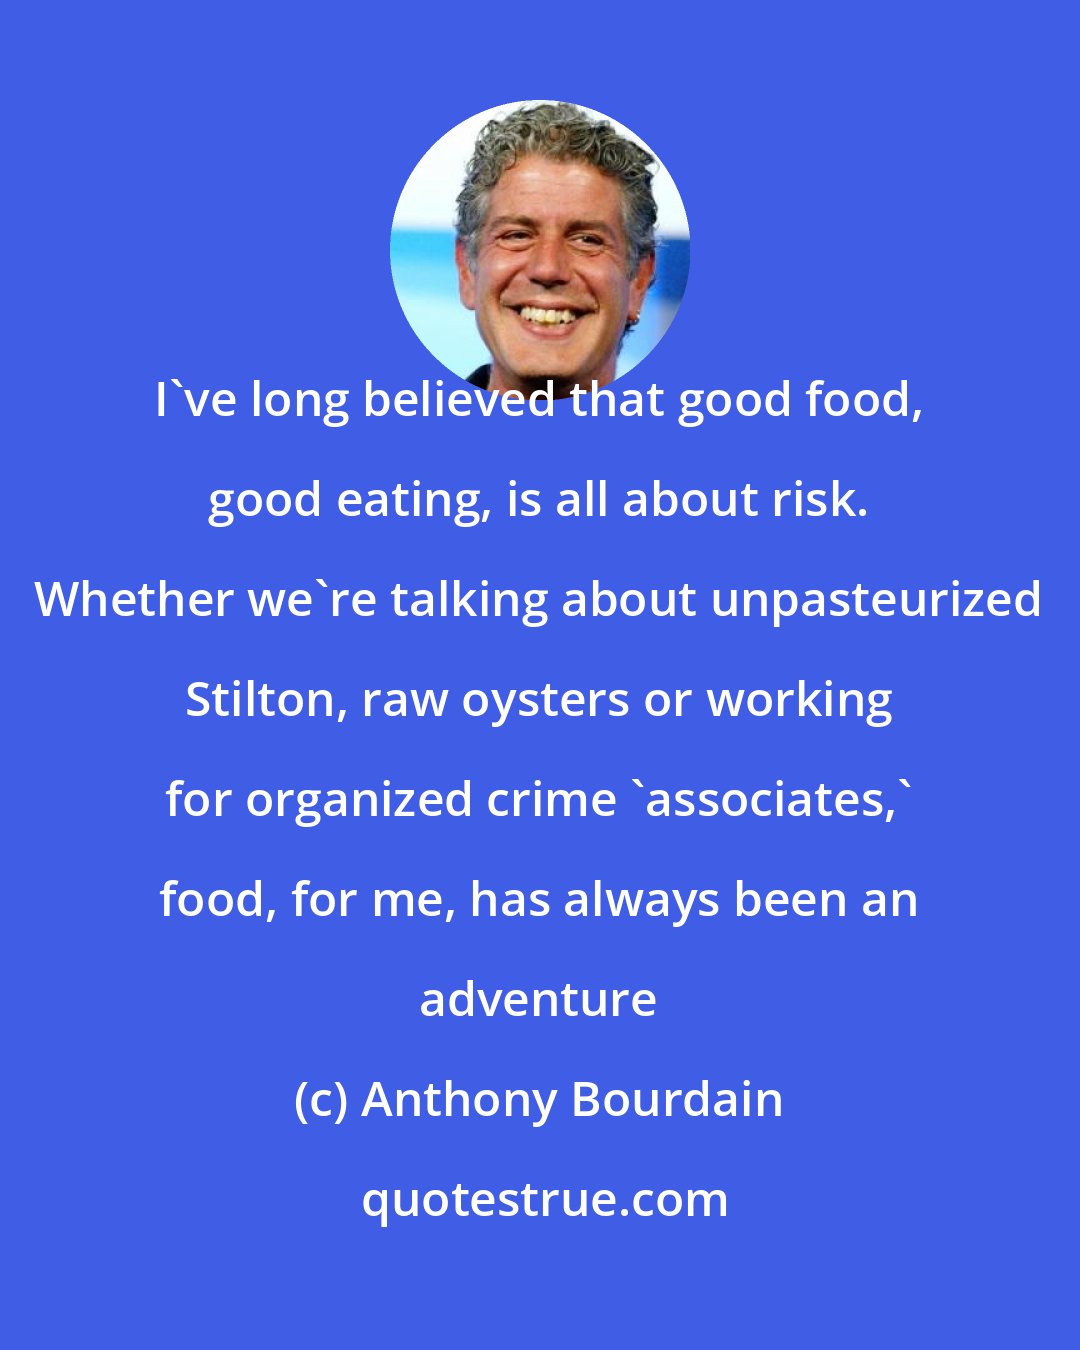 Anthony Bourdain: I've long believed that good food, good eating, is all about risk. Whether we're talking about unpasteurized Stilton, raw oysters or working for organized crime 'associates,' food, for me, has always been an adventure